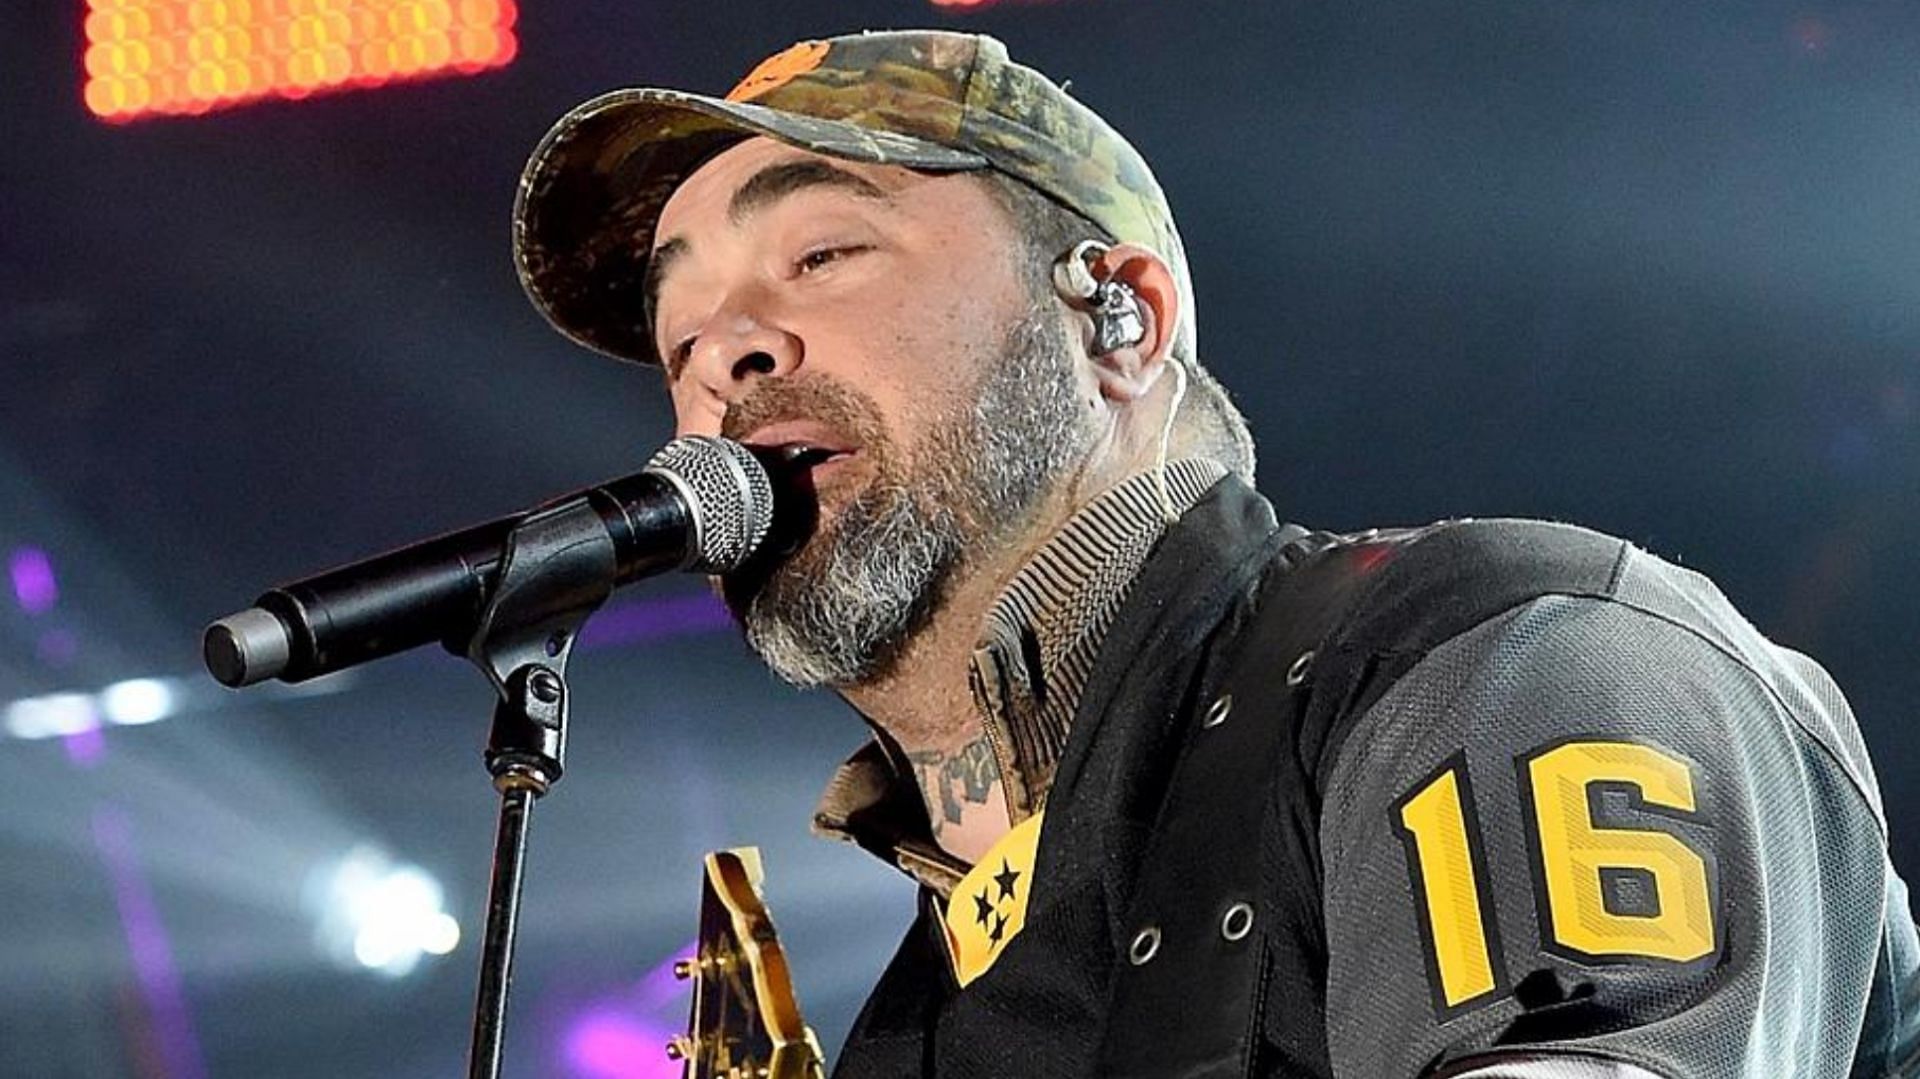 Aaron Lewis Tour 2023 Tickets, venues, dates, and more